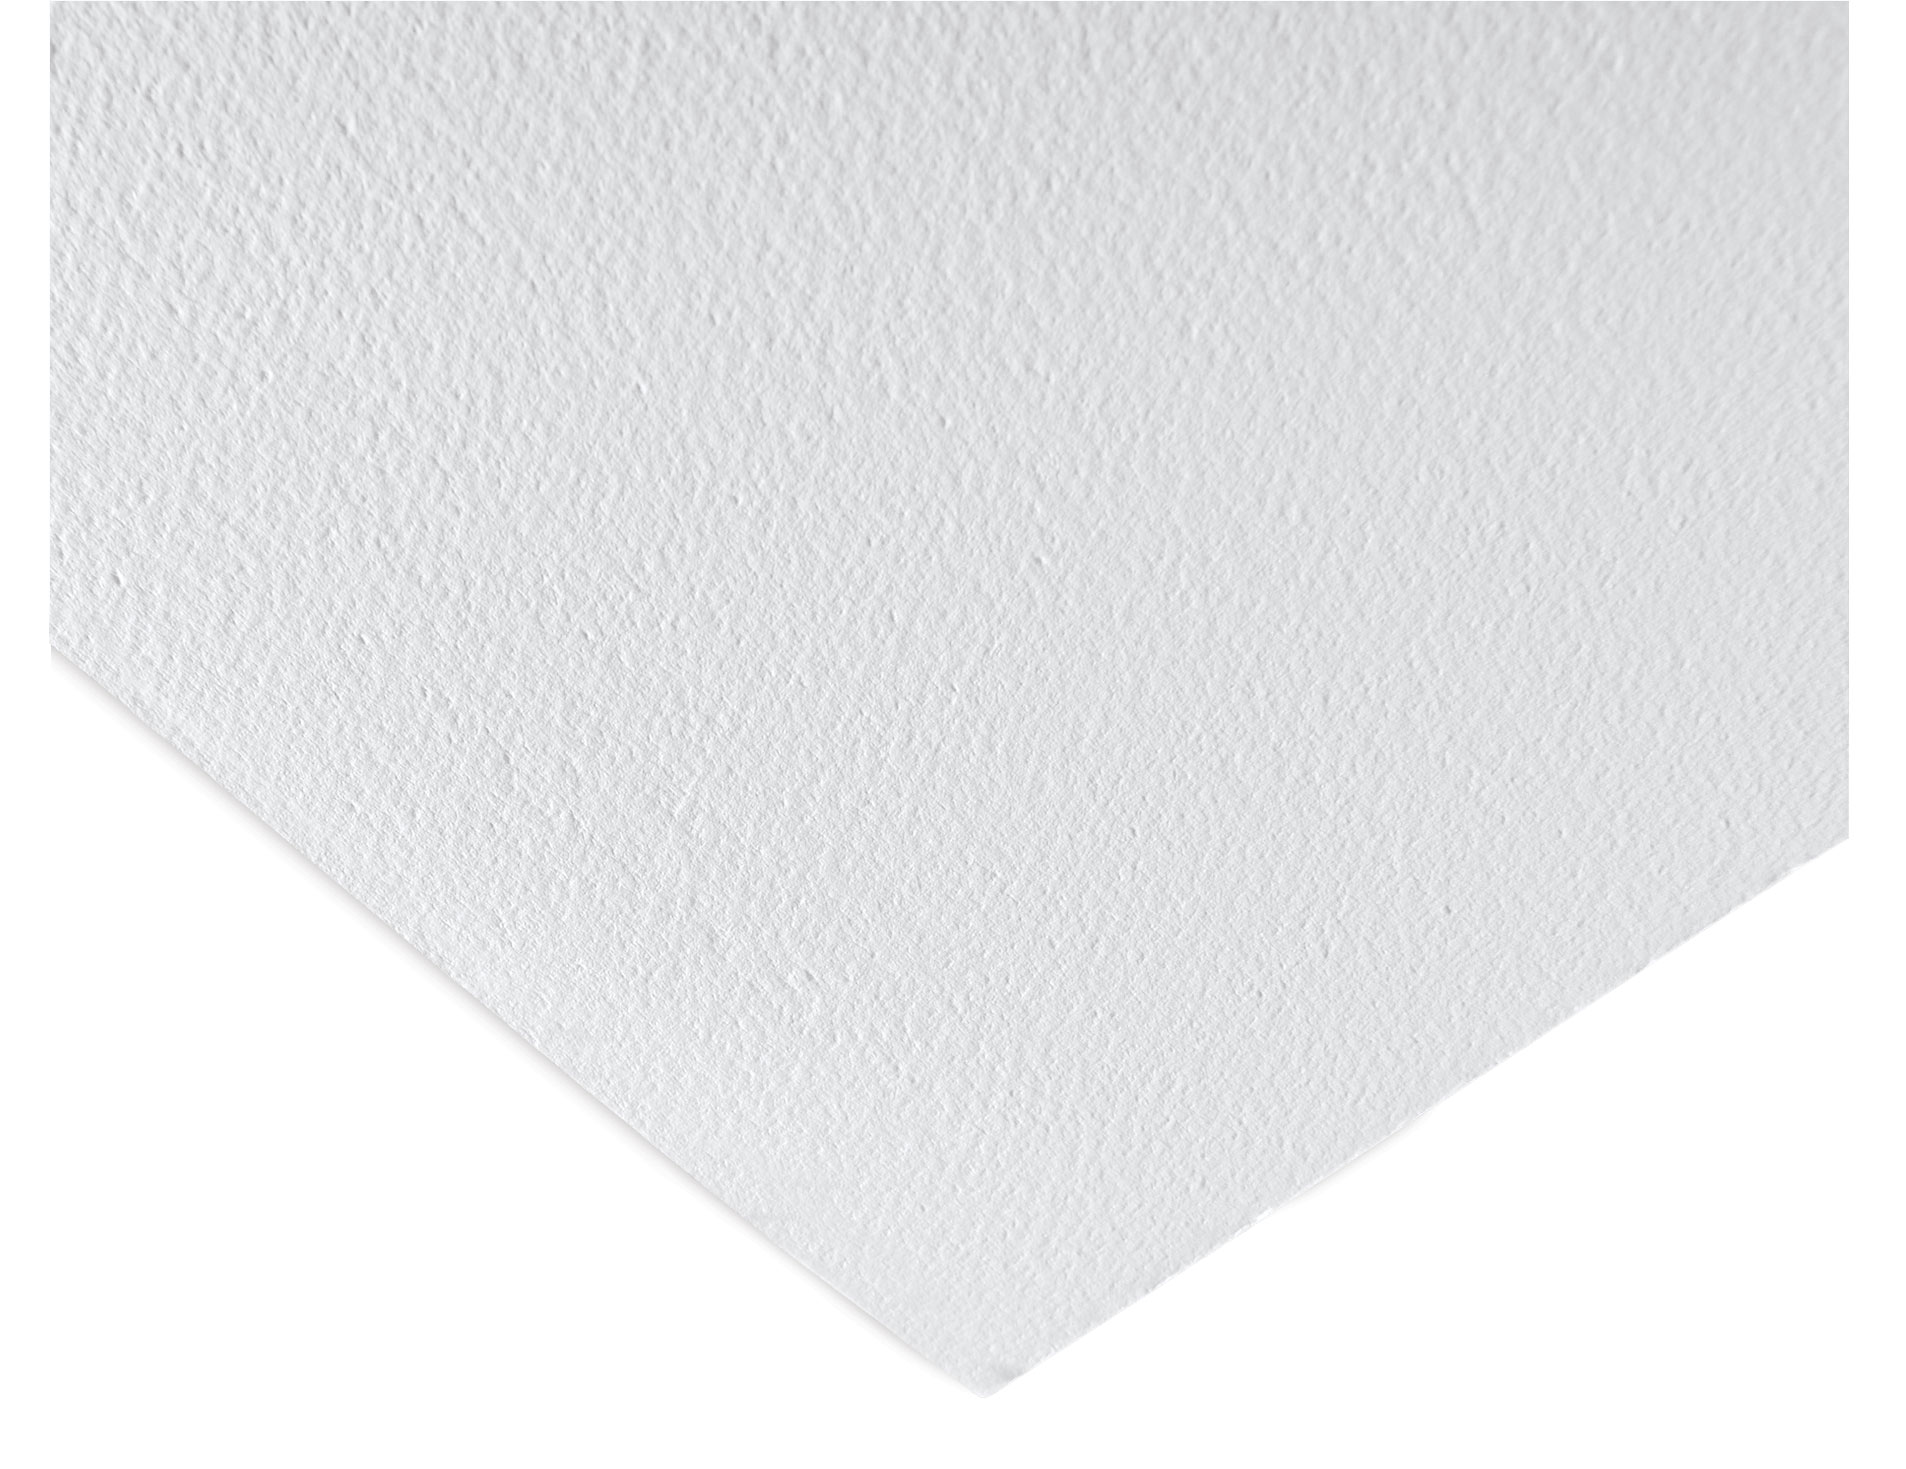 Canson Heritage Cold Press 300lb Paper Sheet - 22 x 30